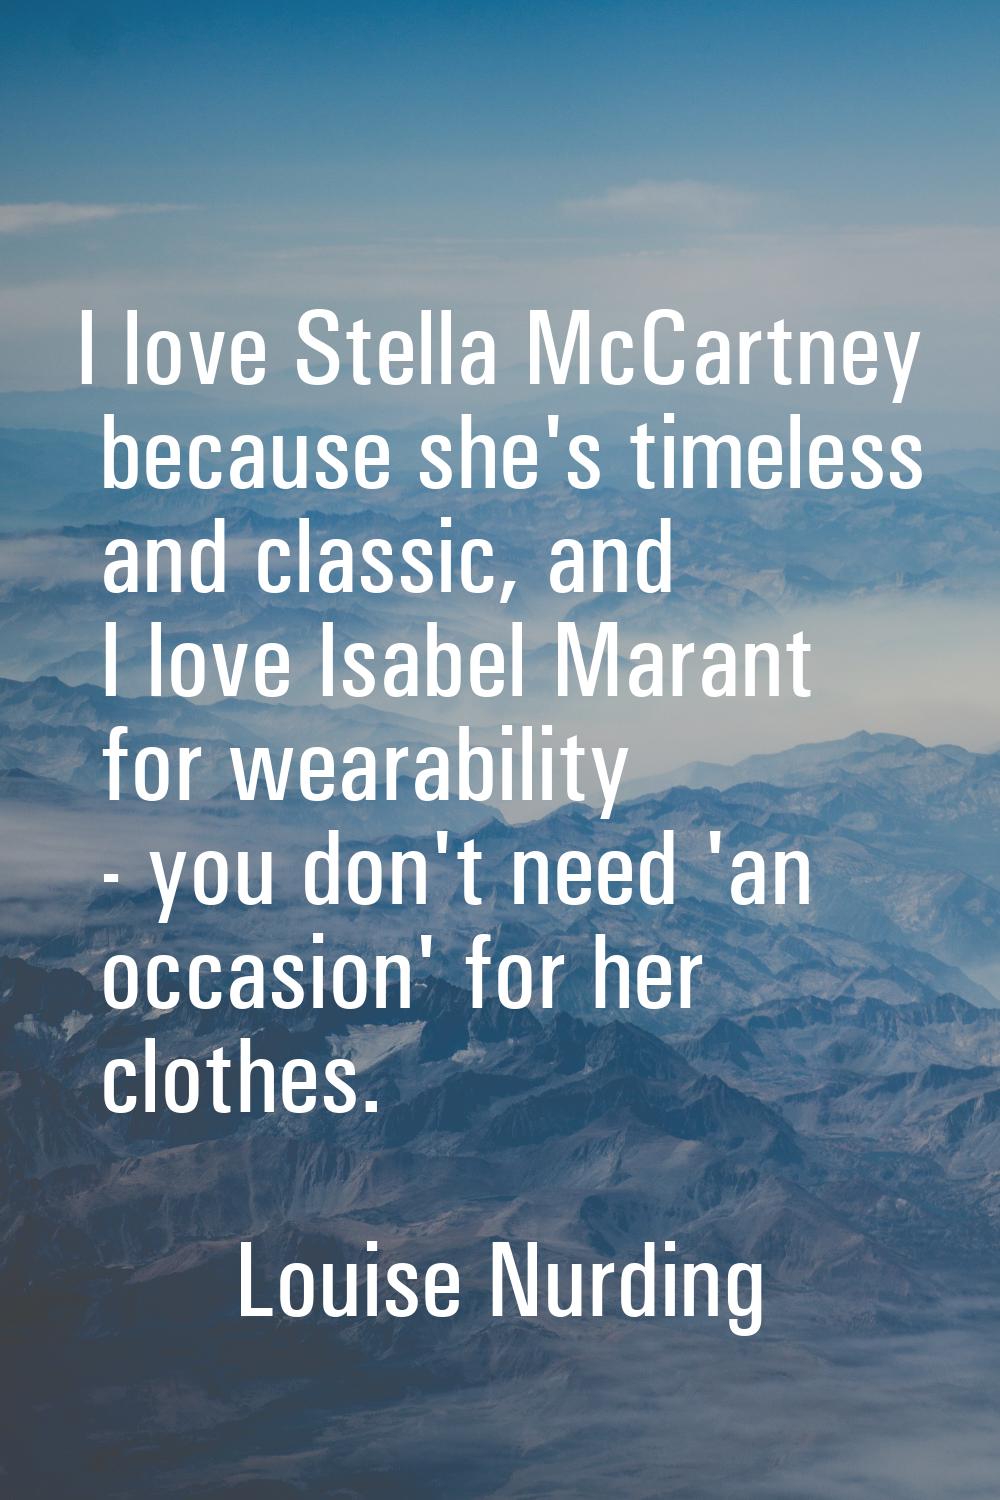 I love Stella McCartney because she's timeless and classic, and I love Isabel Marant for wearabilit